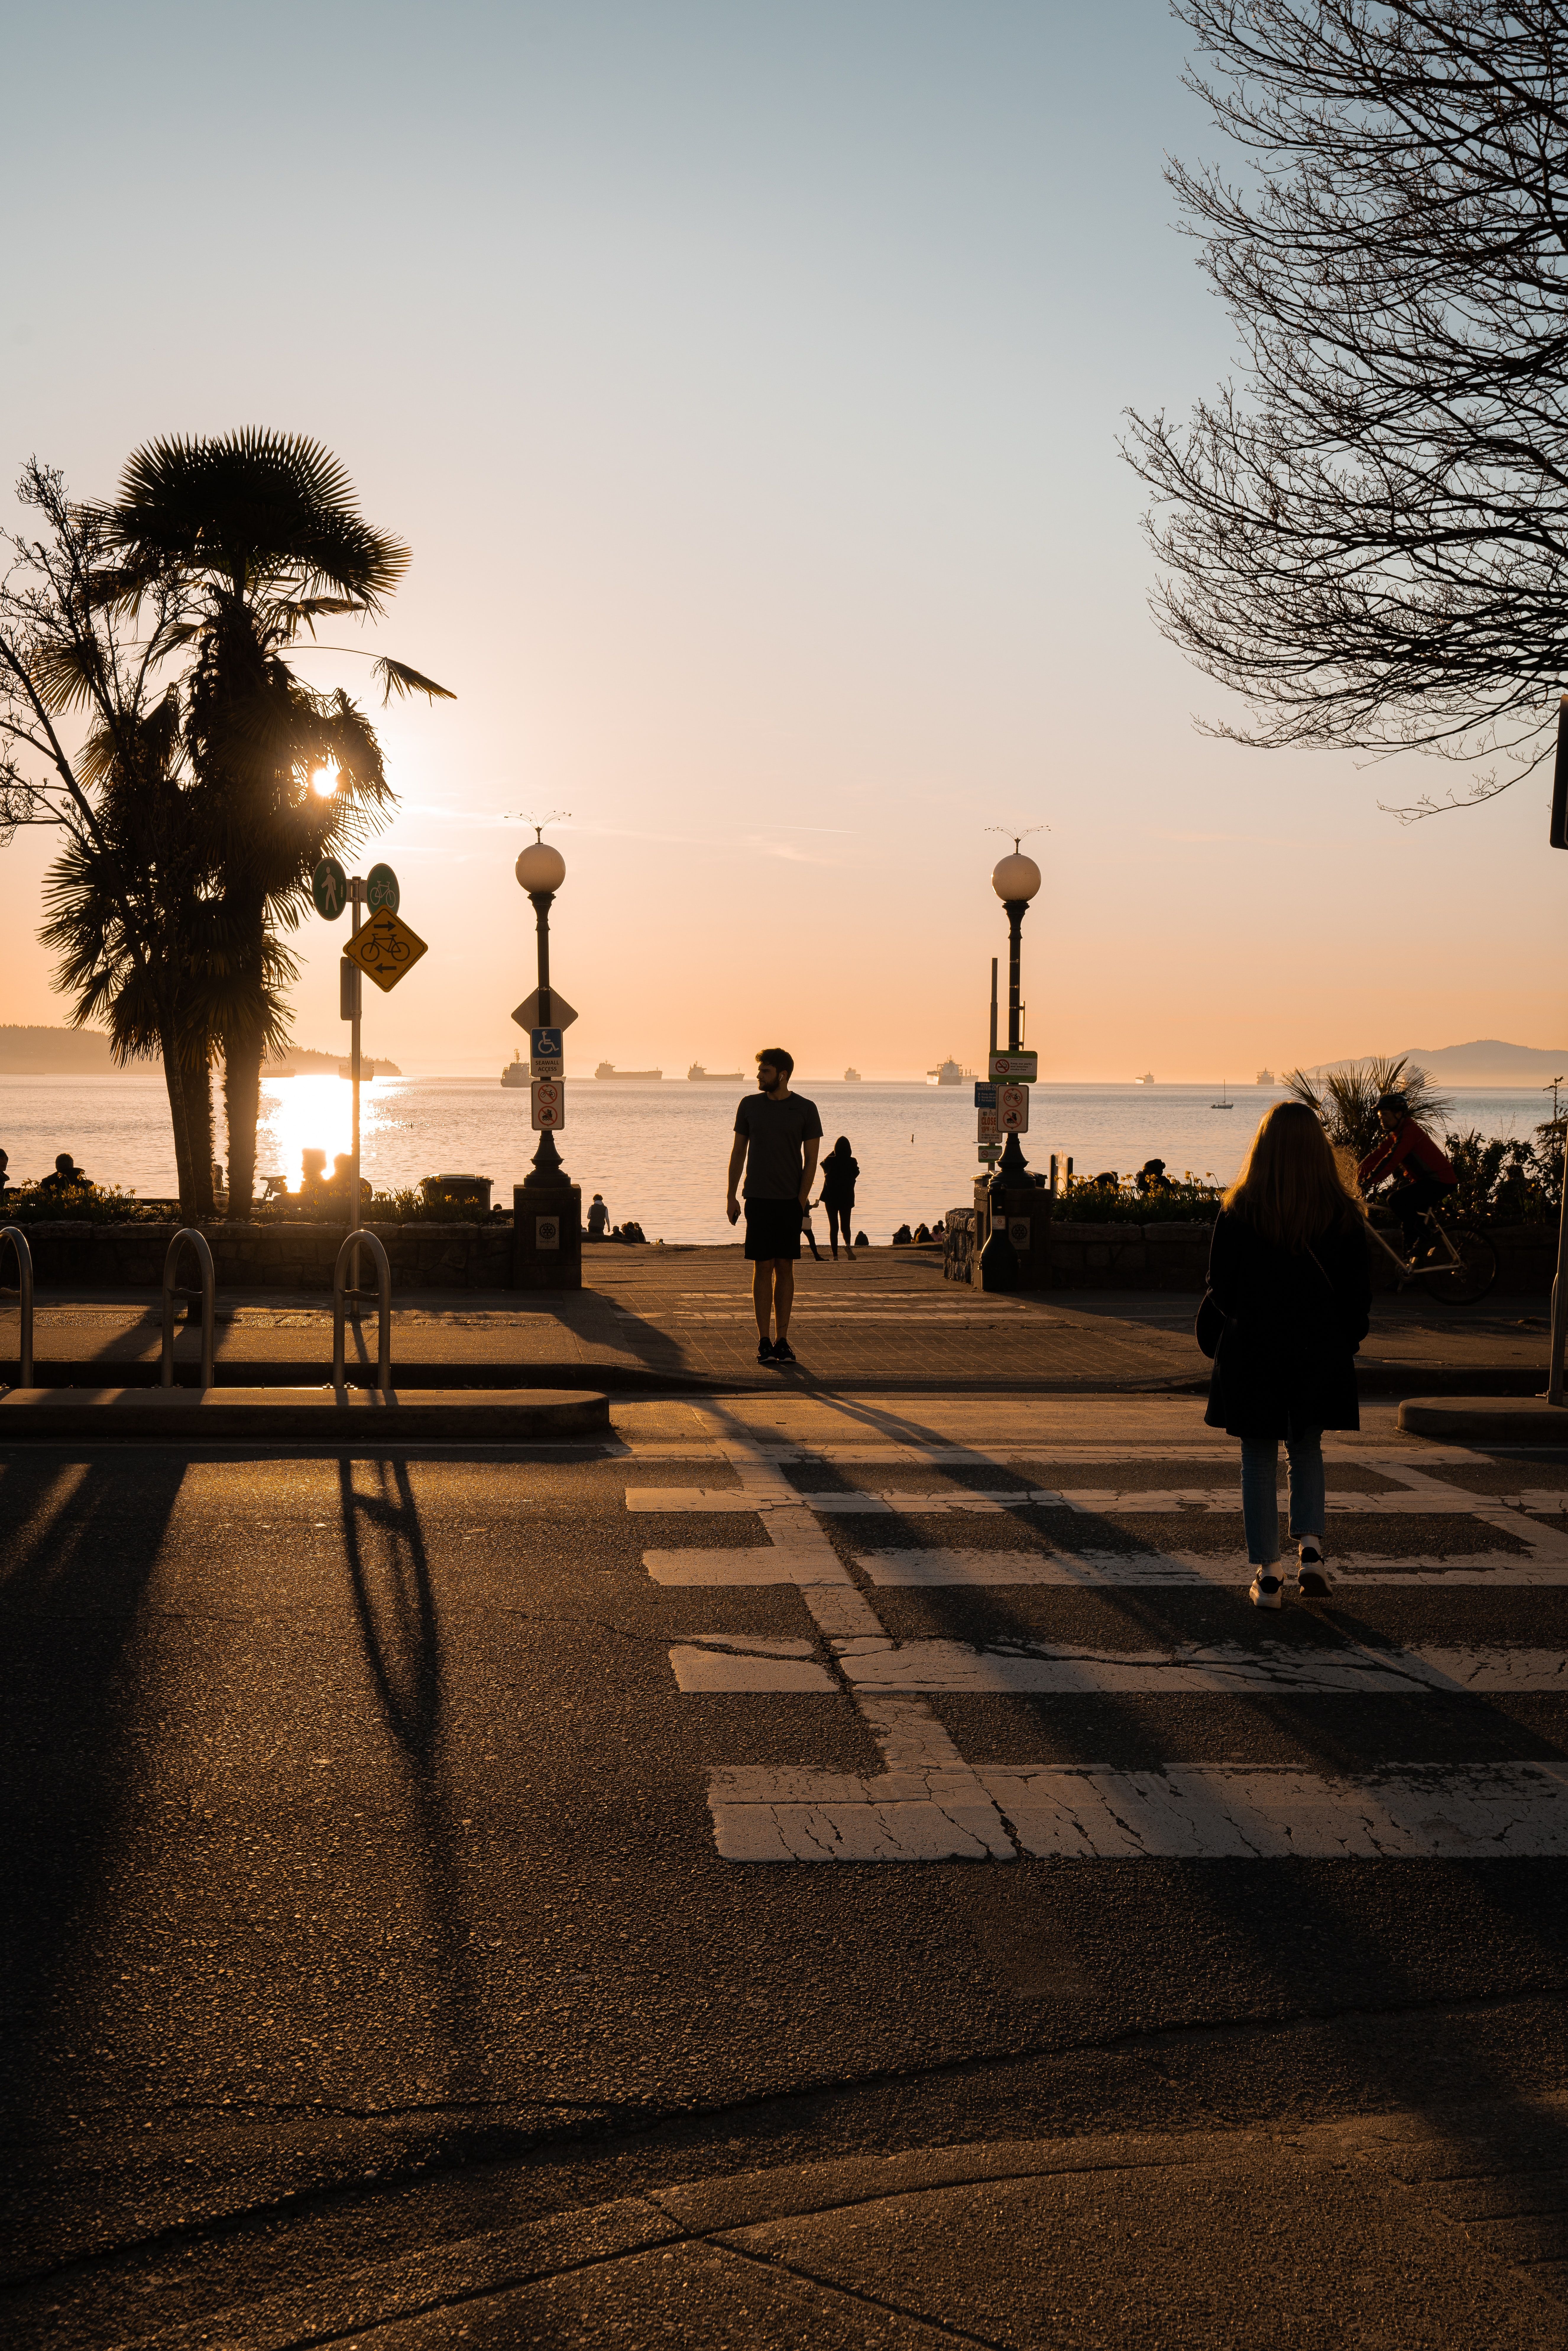 Silhouette of people walking on the sidewalk during sunset. Aesthetic picture, Nature aesthetic, Photography pics